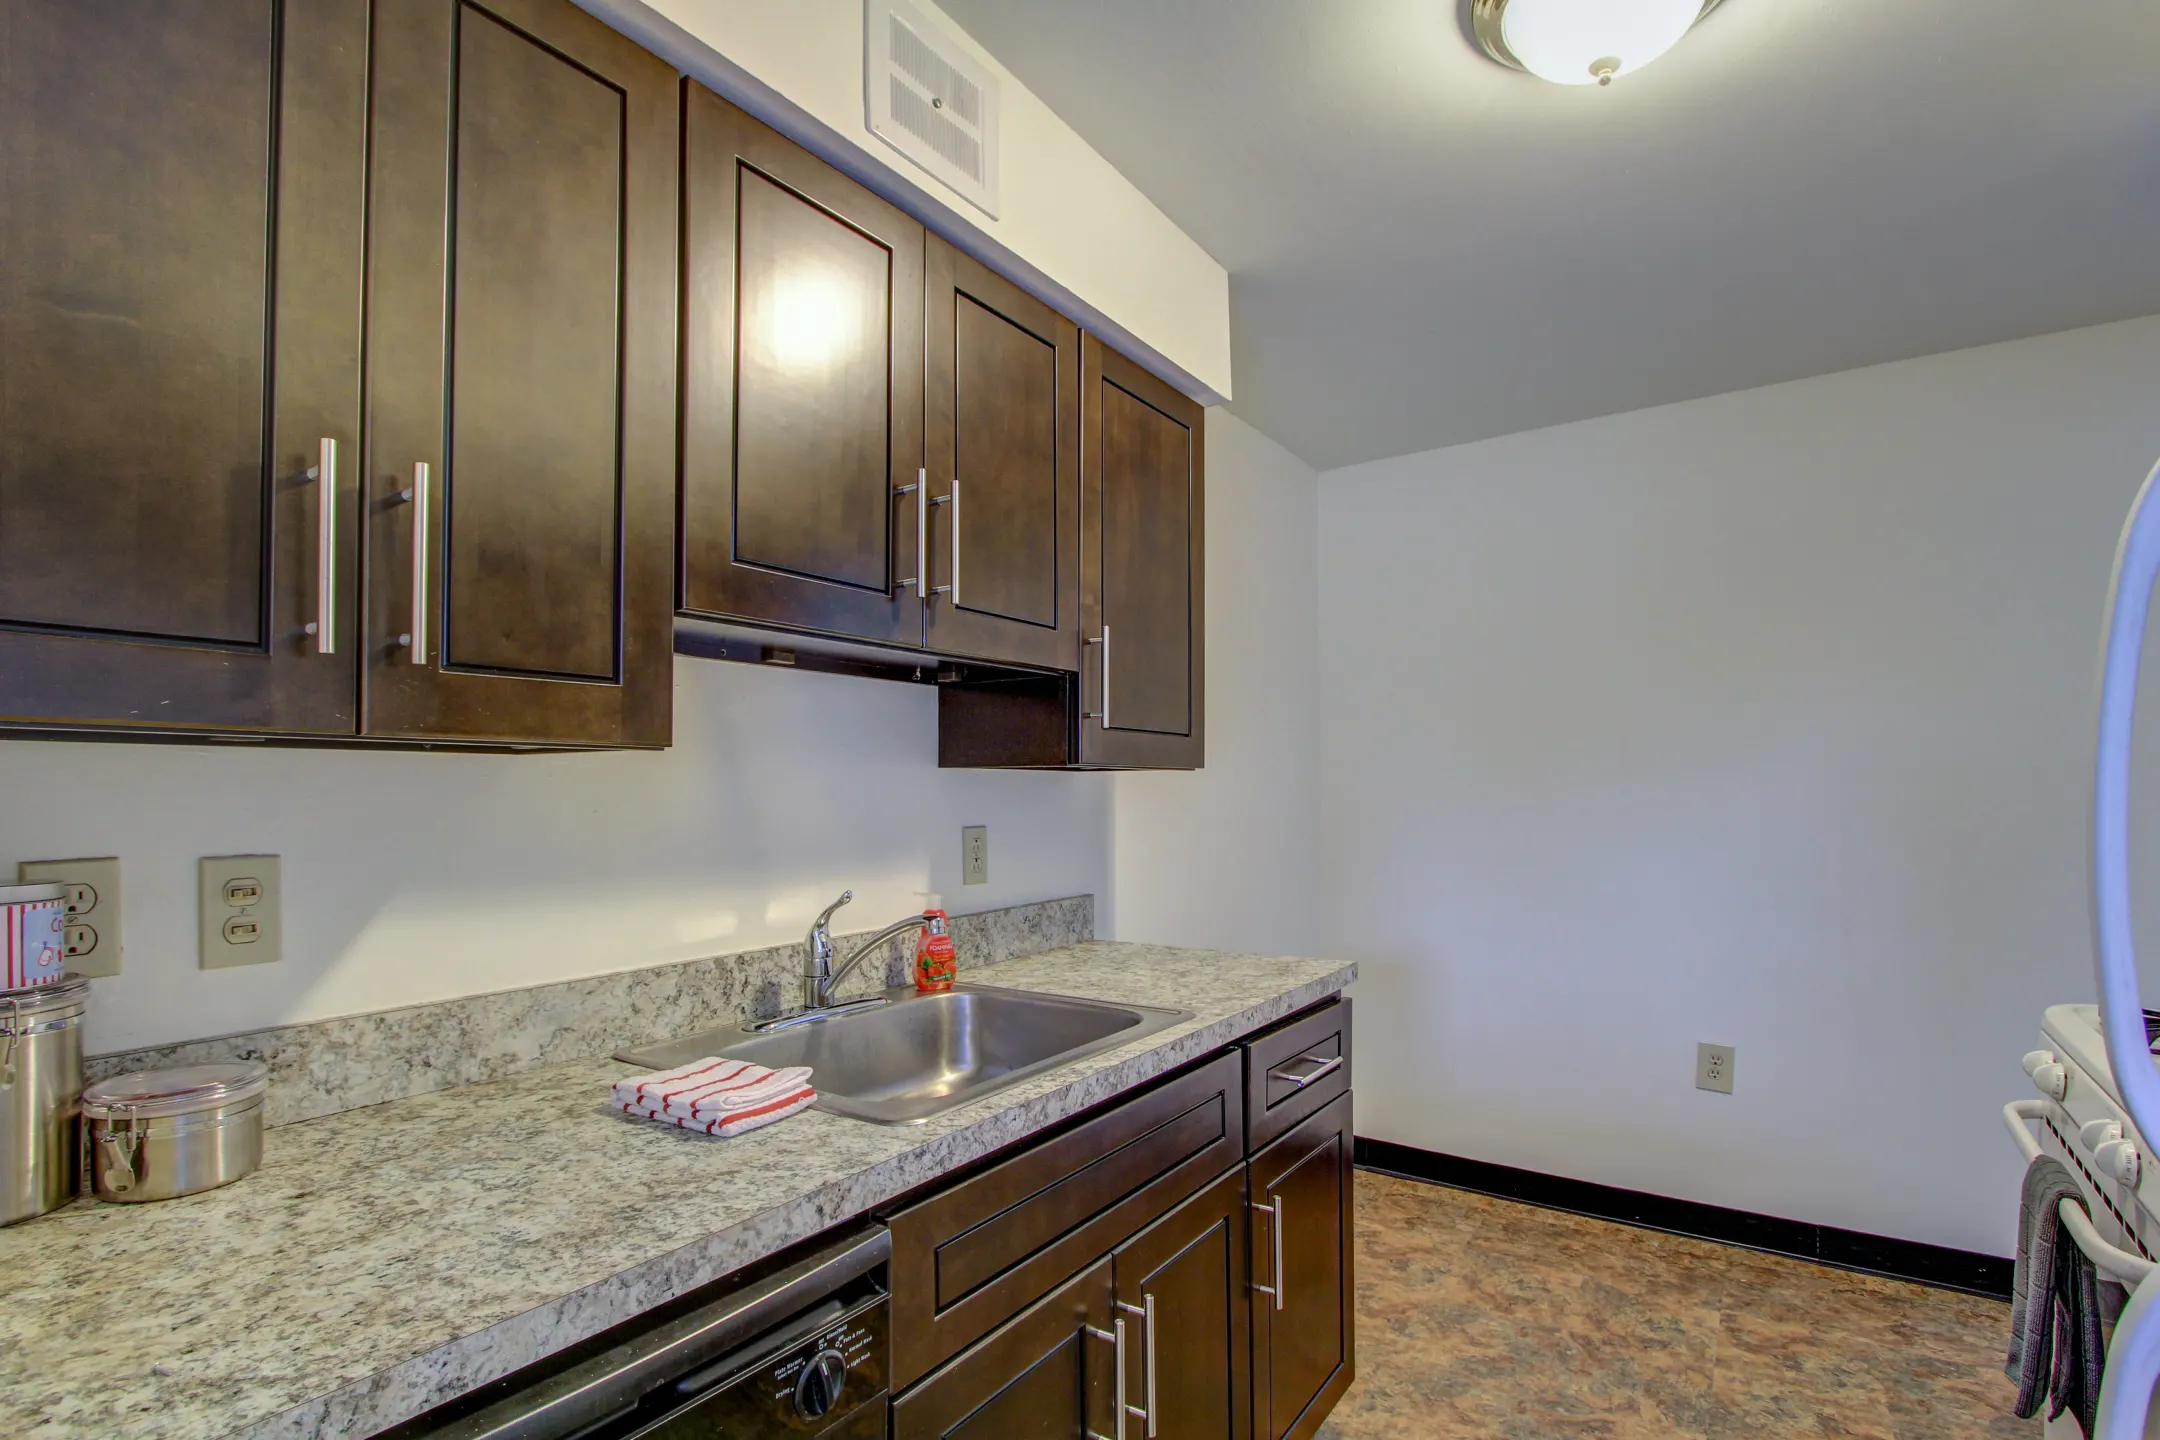 Kitchen - Portage Towers - Cuyahoga Falls, OH